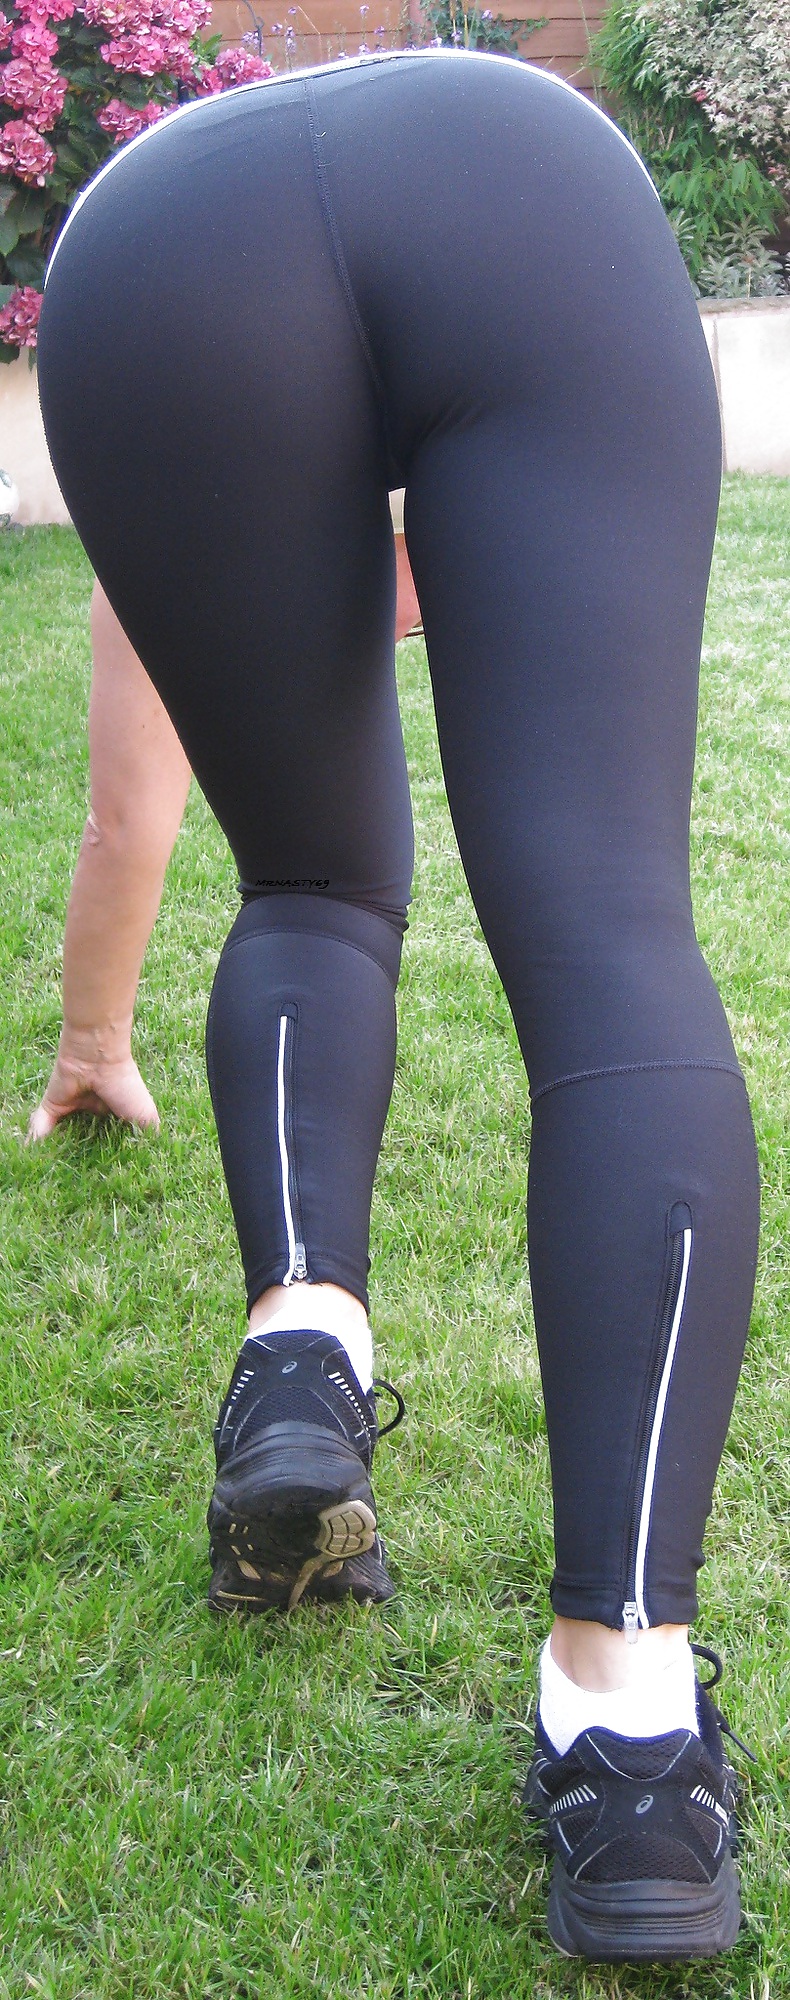 Leggings,See Thru, Camel Toes And Asses #20168331